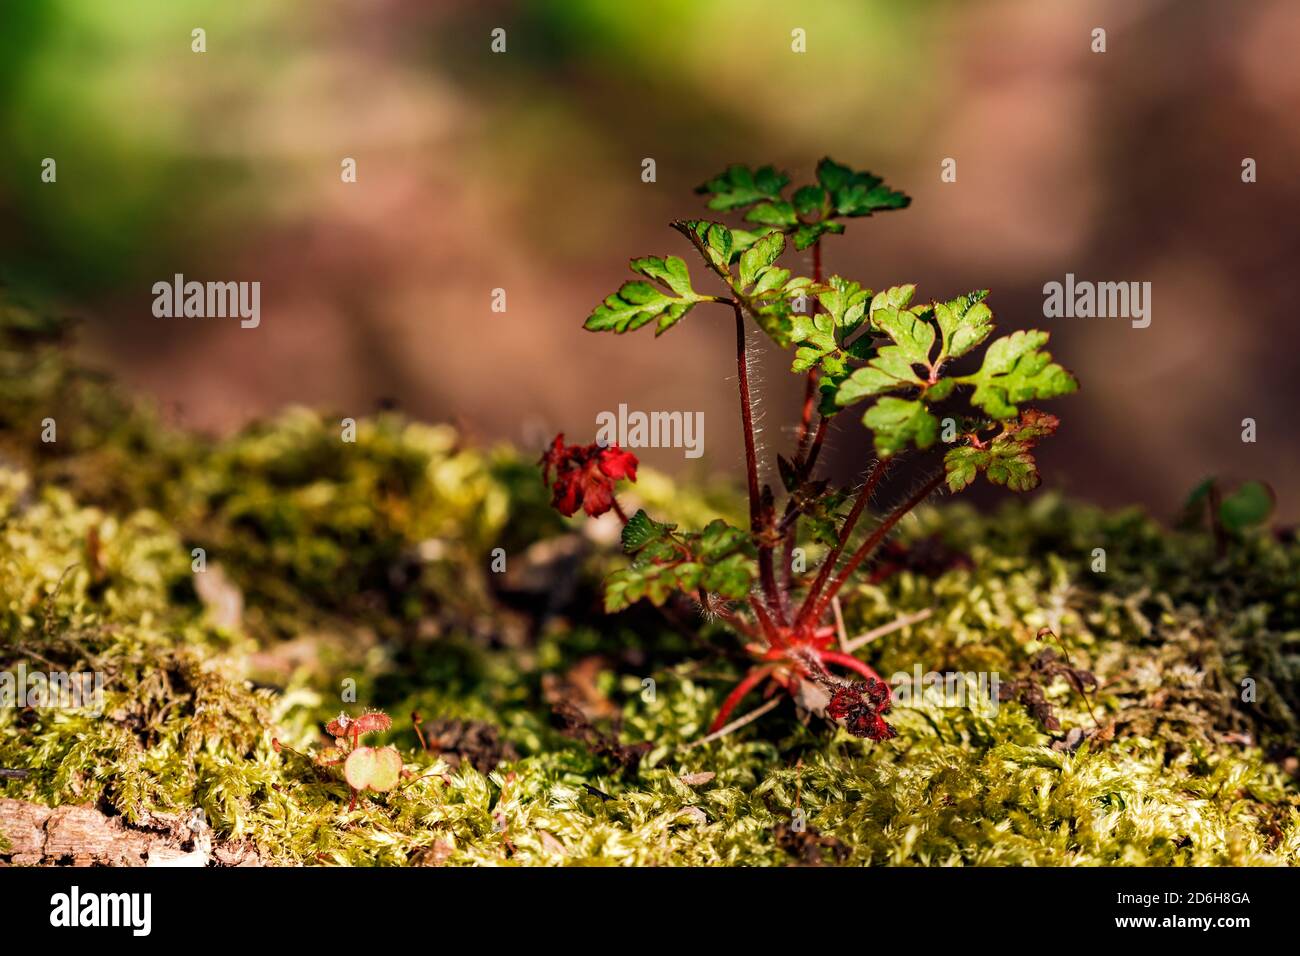 Despite the shade, the undergrowth offers its own habitat for many plants and living beings Stock Photo